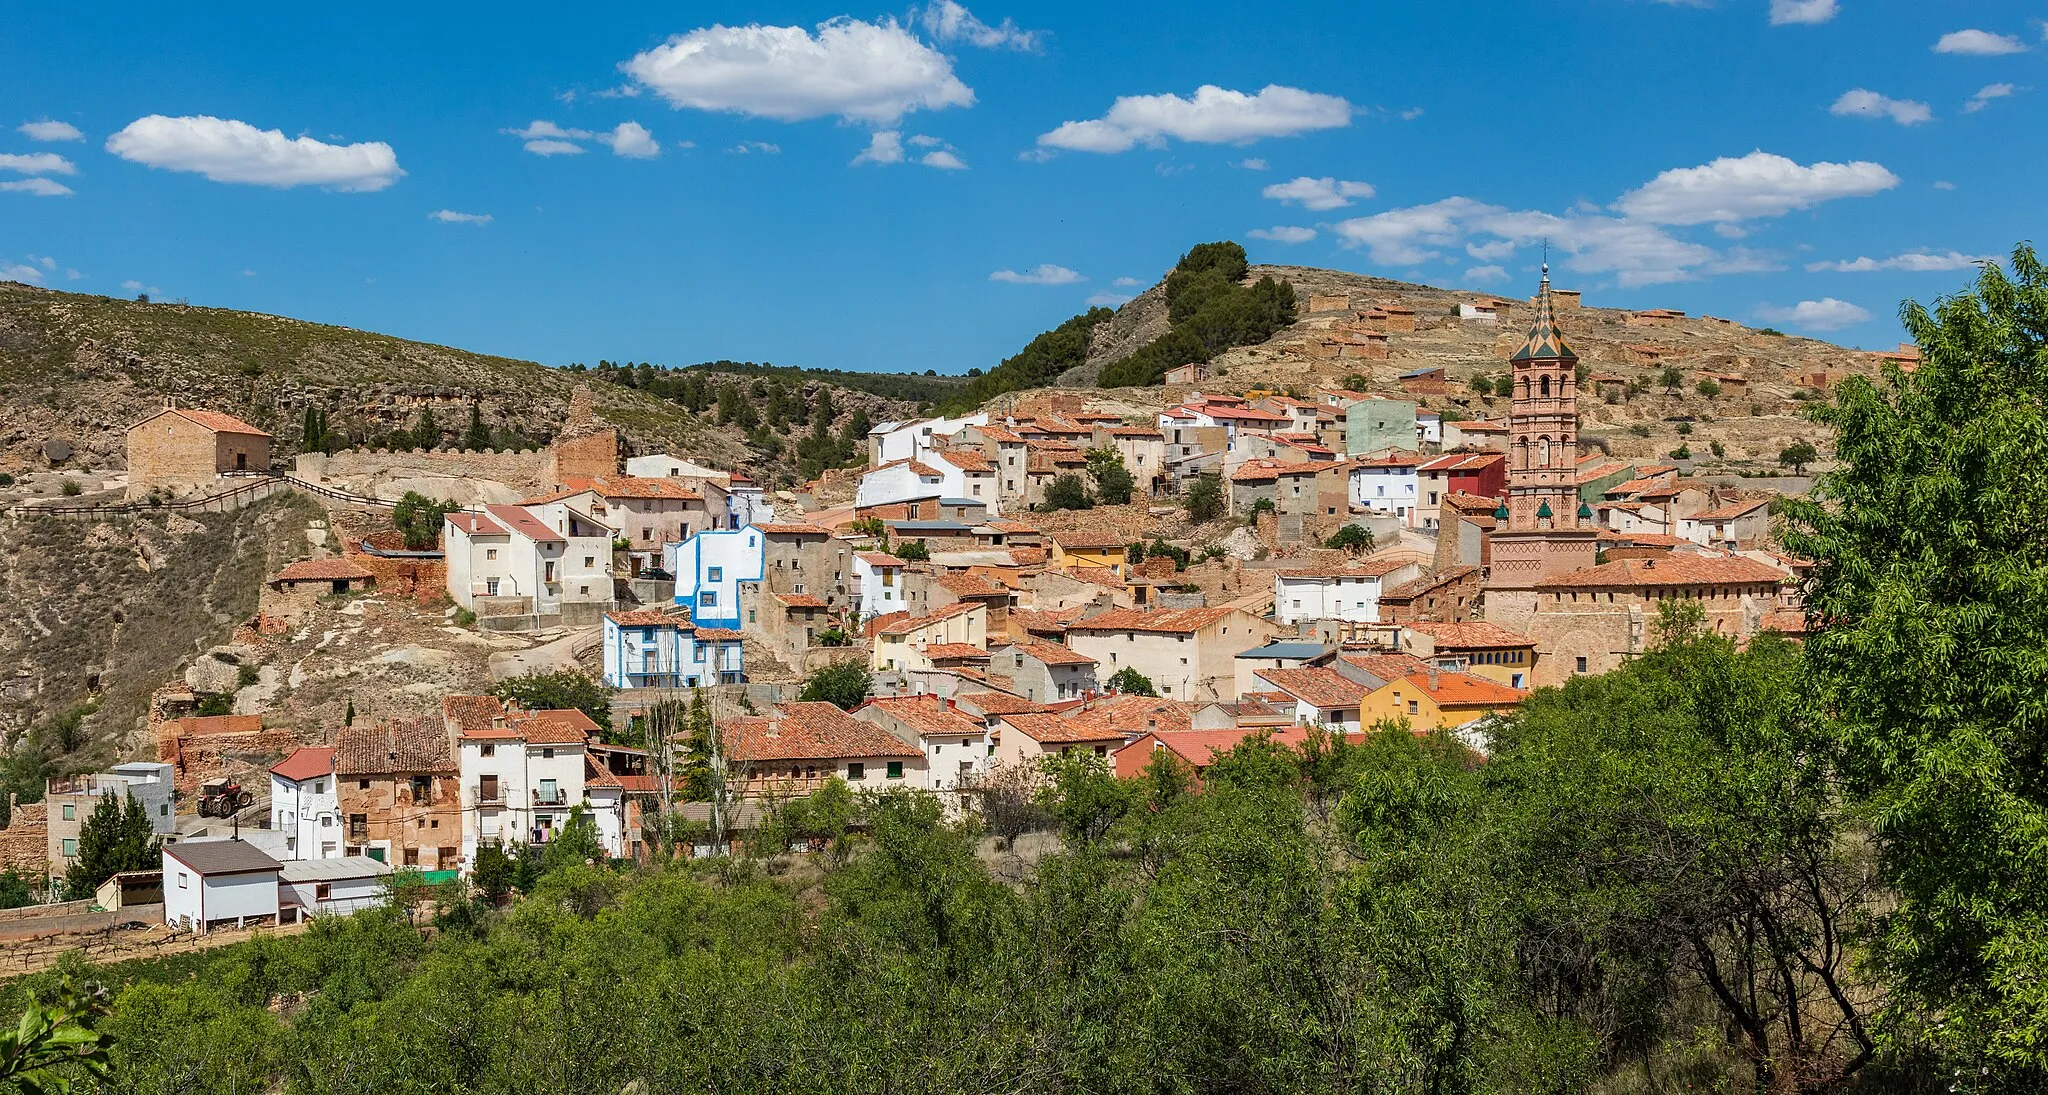 Photo showing: General view of the village of Monterde, province of Zaragoza, Aragon, Spain. The most important heritage of Monterde, that has a population of 198 (data from 2016), are the church of the Assumption (on the right) of mudéjar-style and erected in the 15th century and its medieval castle (top left) from the 14th century.